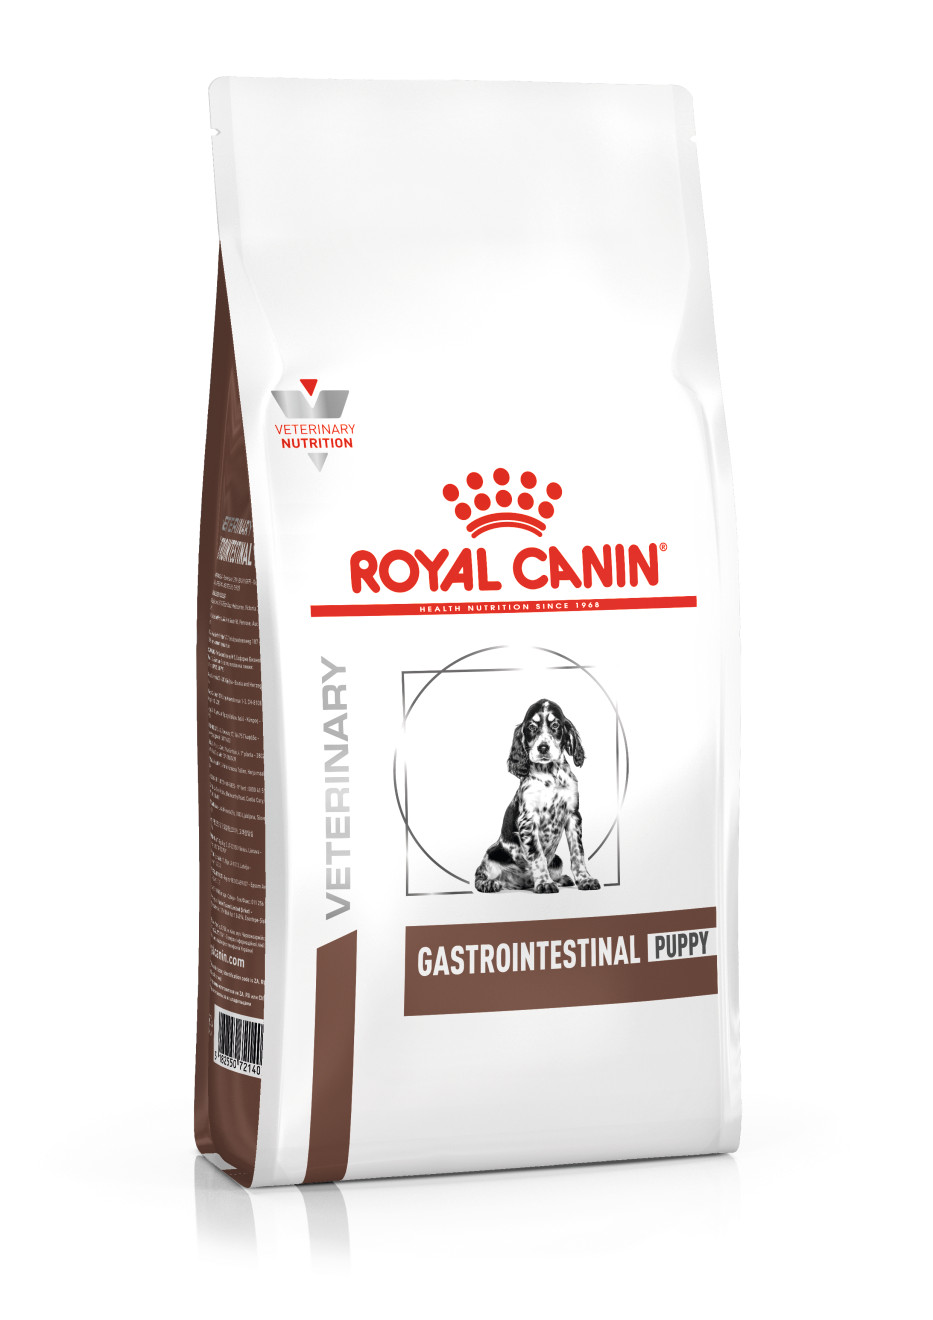 Royal Canin Veterinary Gastrointestinal Puppy pour chien